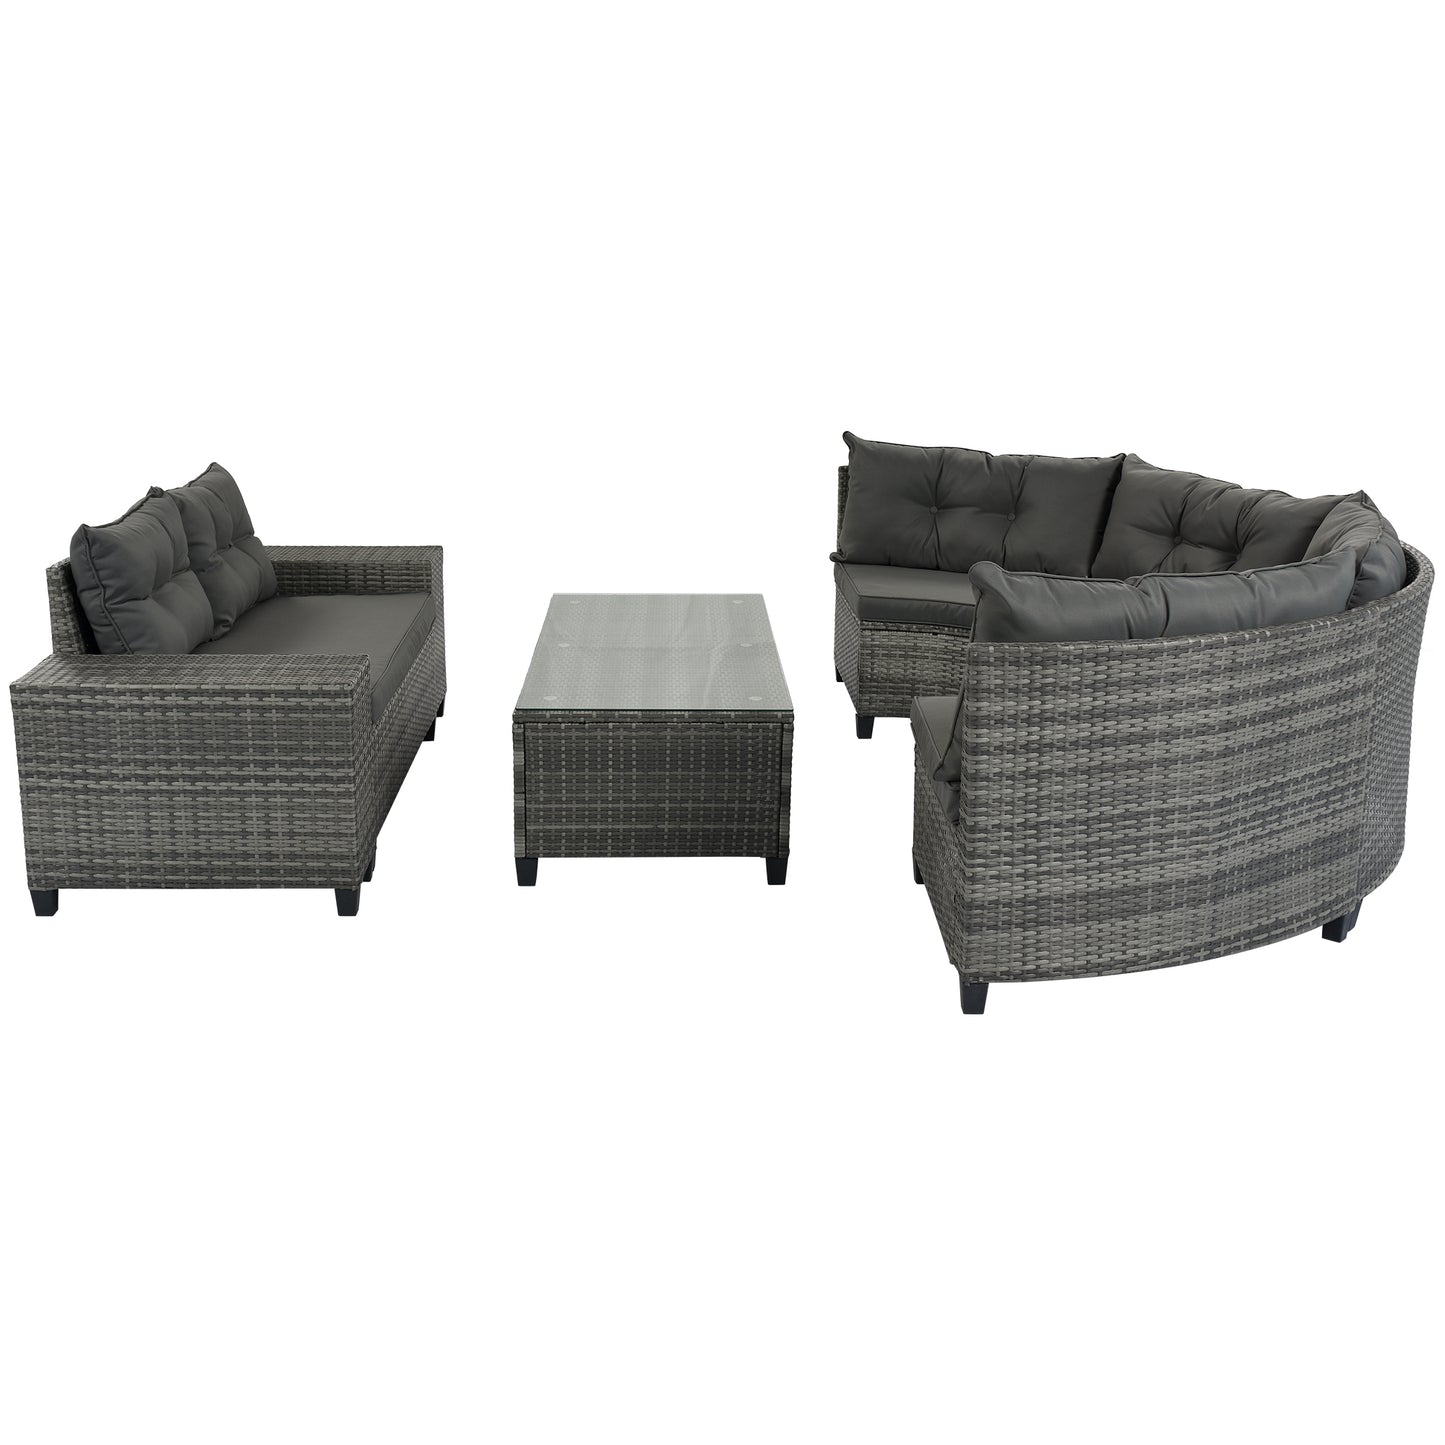 8-pieces Outdoor Wicker Round Sofa Set, Half-Moon Sectional Sets All Weather, Curved Sofa Set With Rectangular Coffee Table, PE Rattan Water-resistant and UV Protected, Movable Cushion, Gray